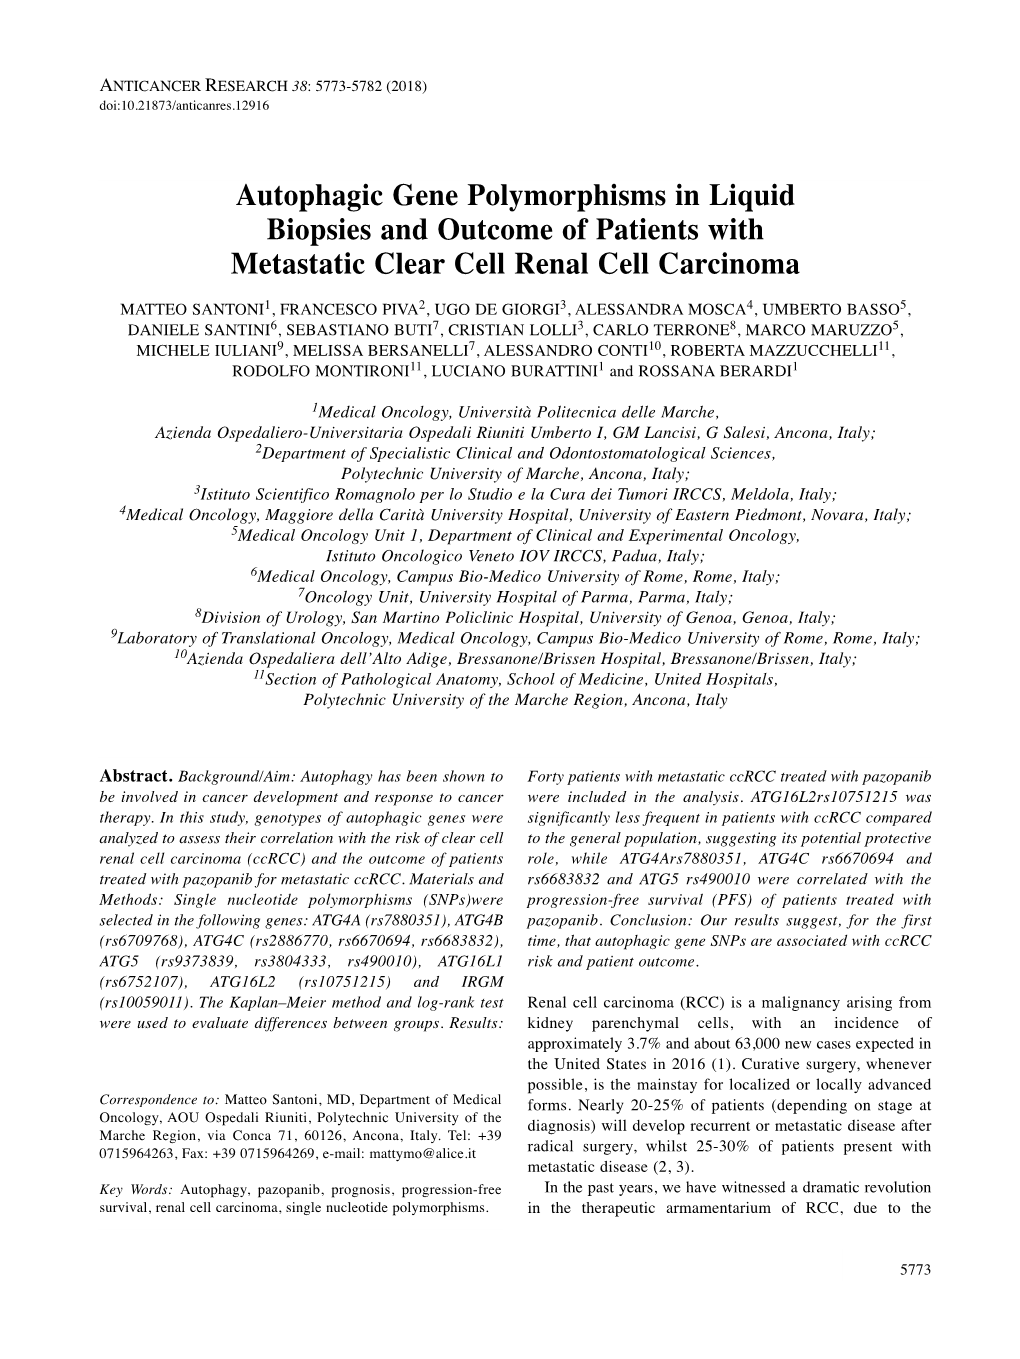 Autophagic Gene Polymorphisms in Liquid Biopsies and Outcome Of